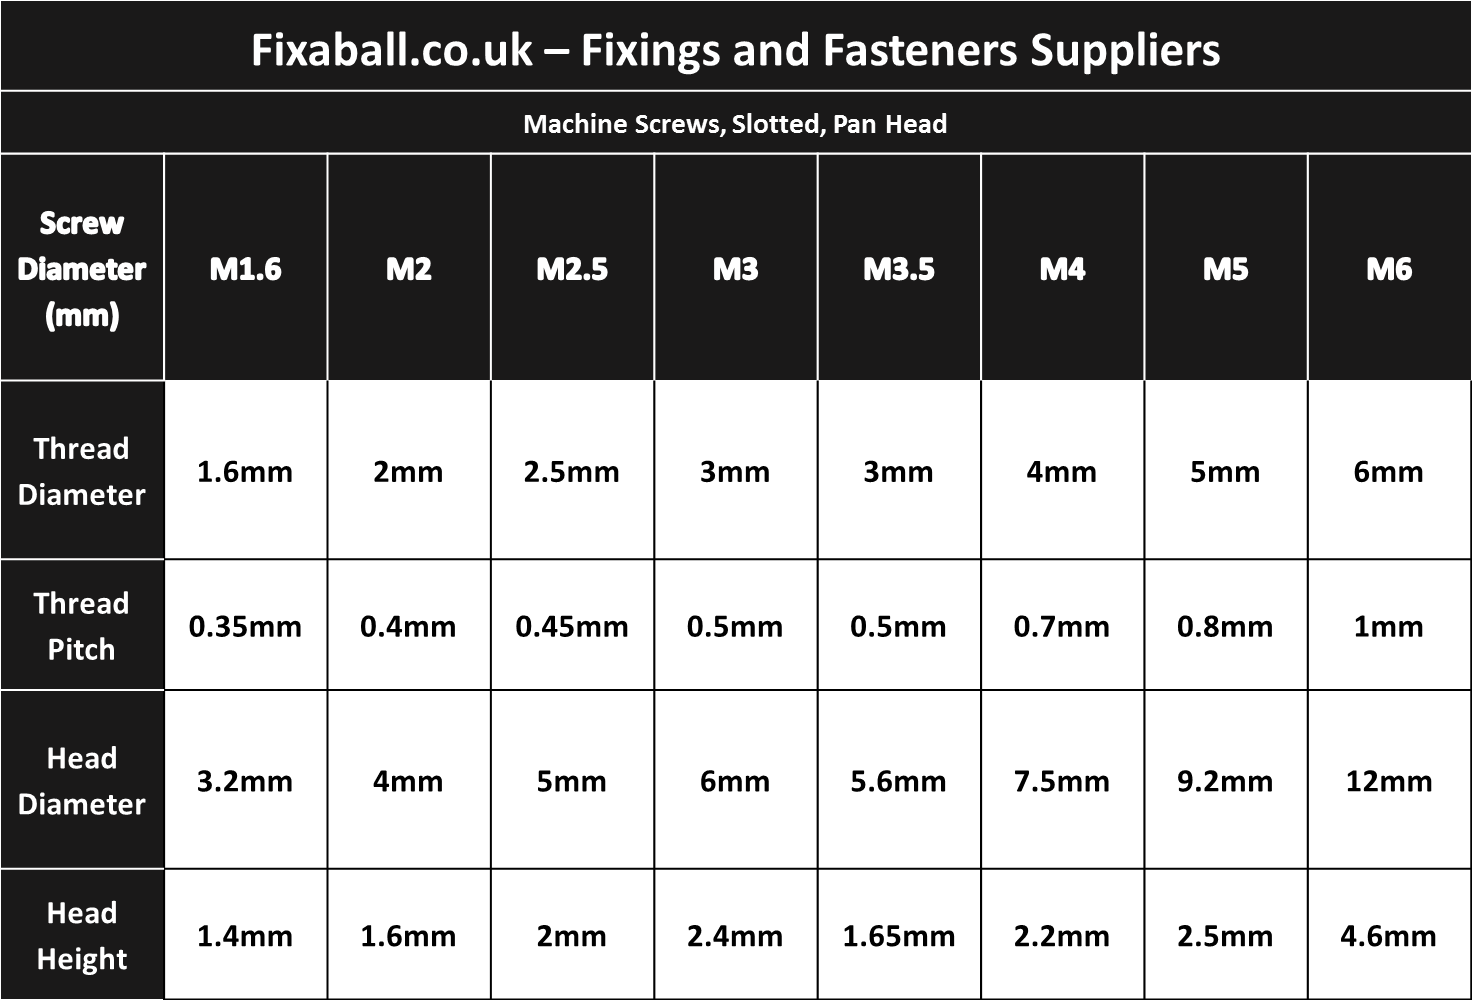 M6 Machine Screws Slotted Pan Head Brass DIN 85 - Fixaball Ltd. Fixings and Fasteners UK